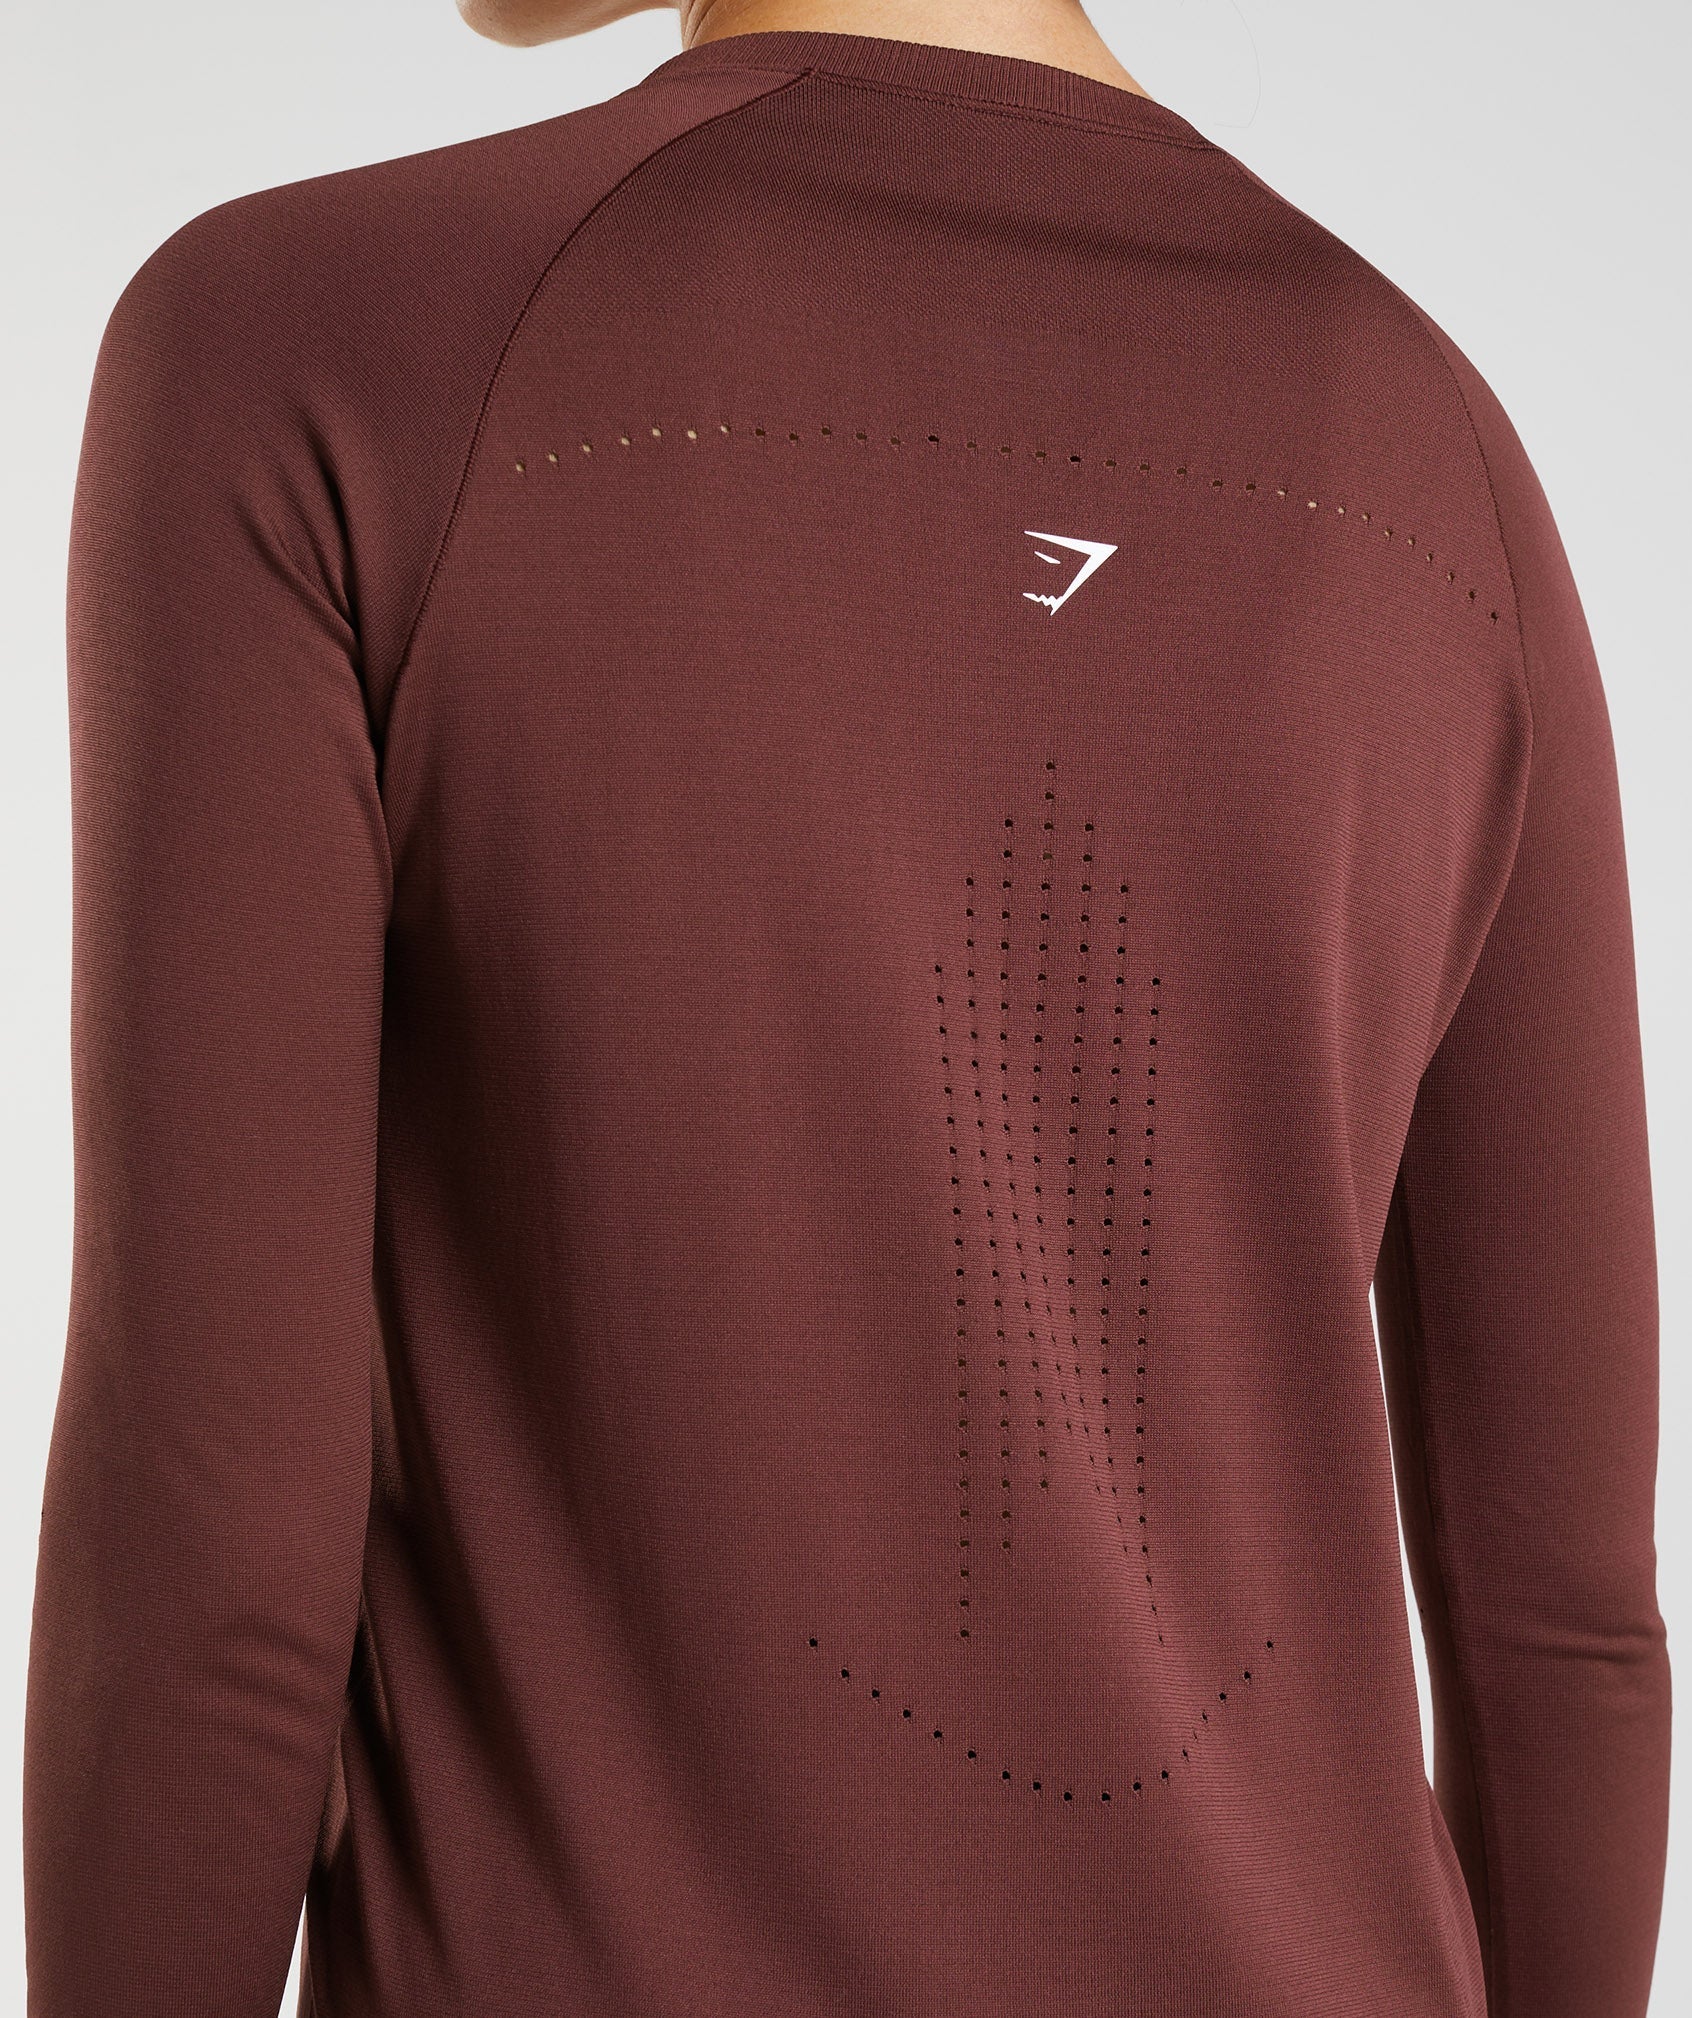 Sweat Seamless Long Sleeve Top in Baked Maroon - view 6